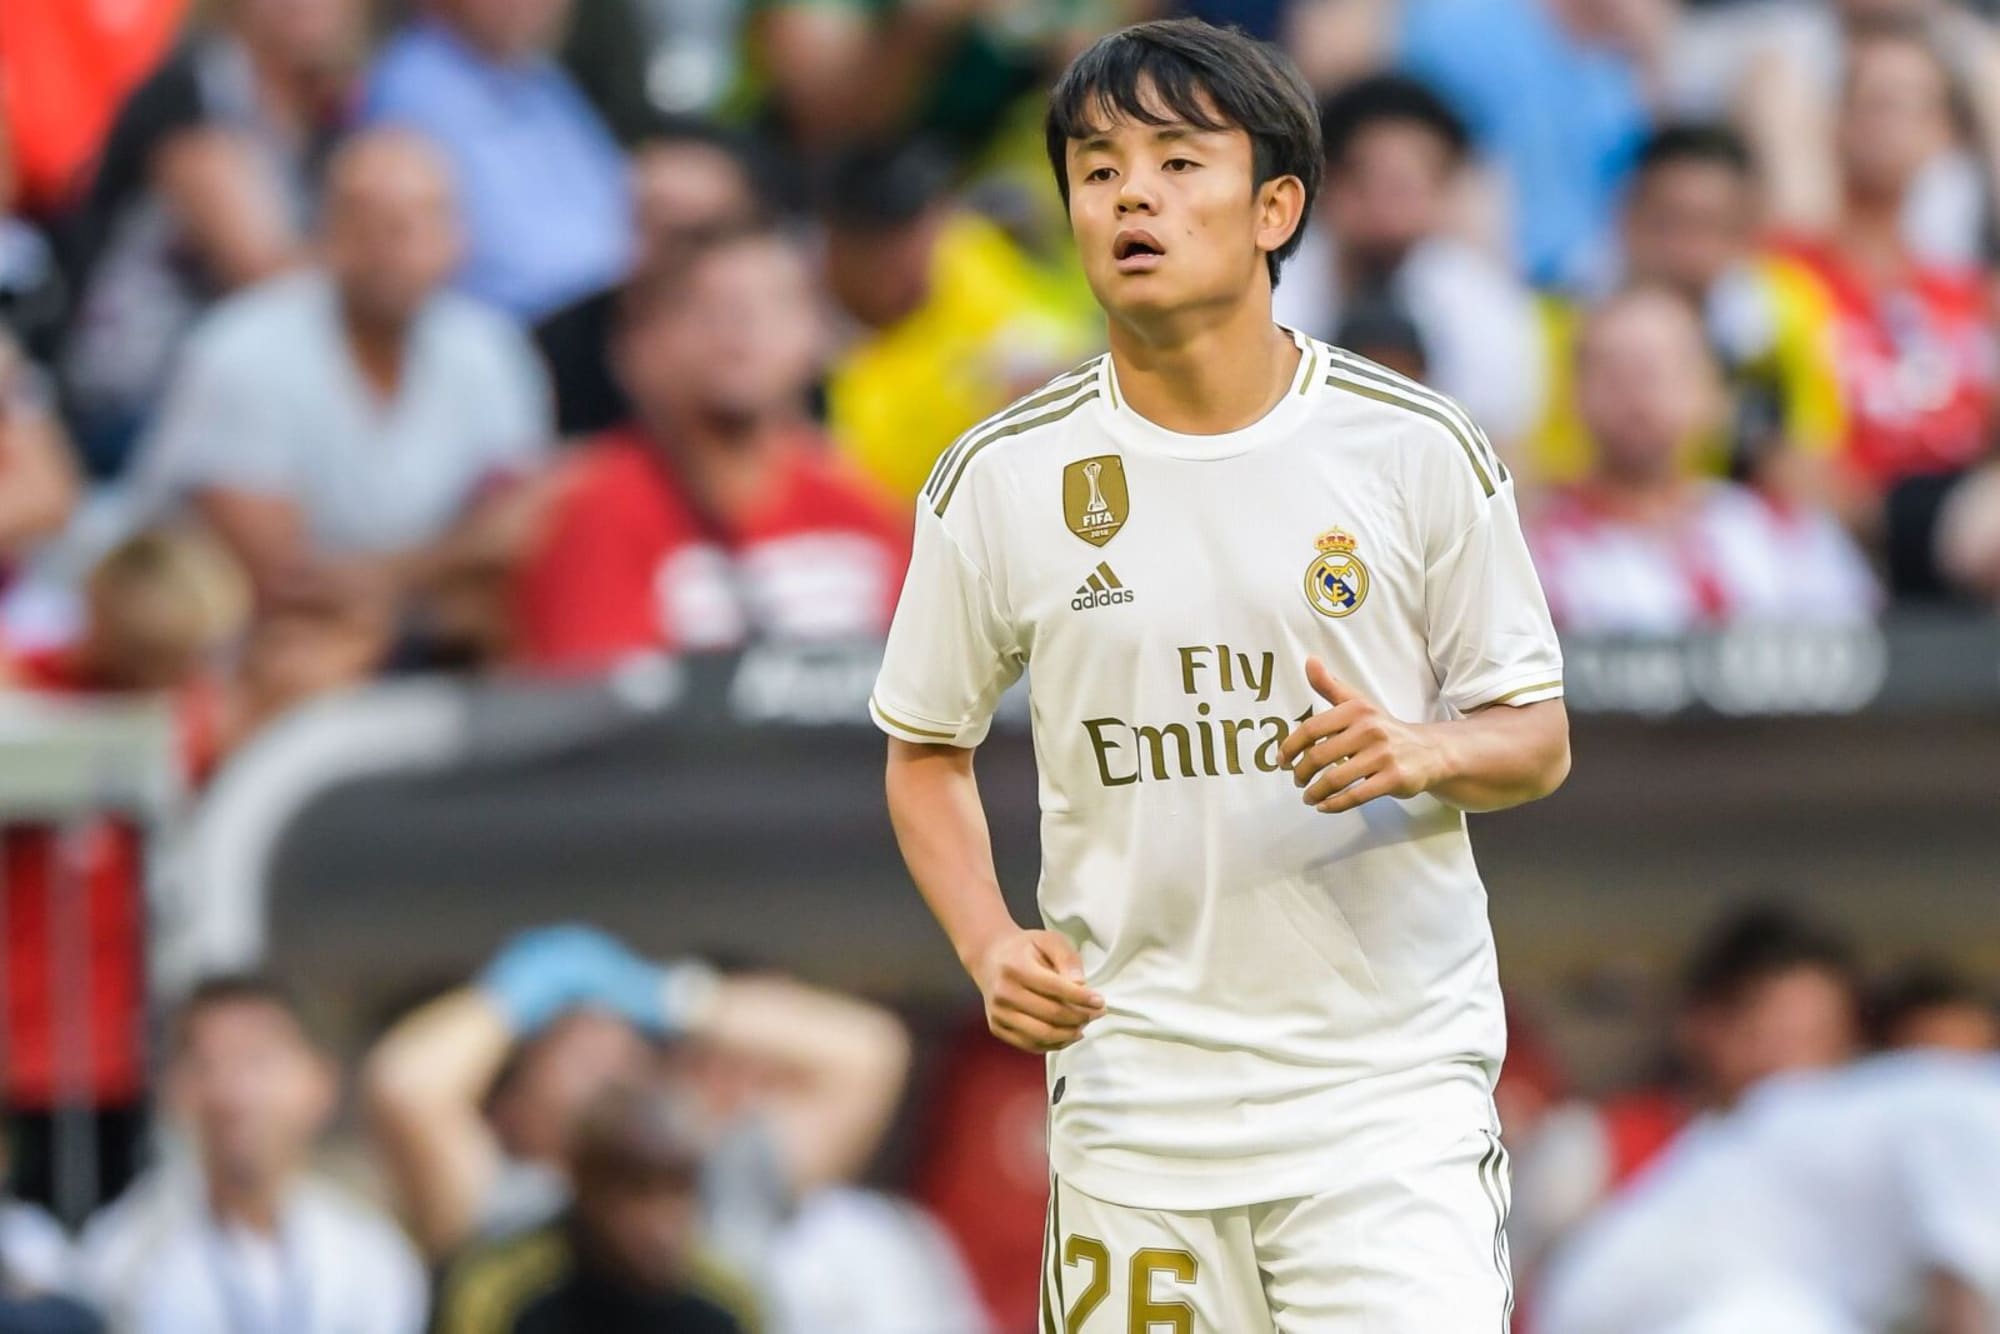 Takefusa Kubo (久保 建英) age, position, salary, team, girlfriend, facts, football Career